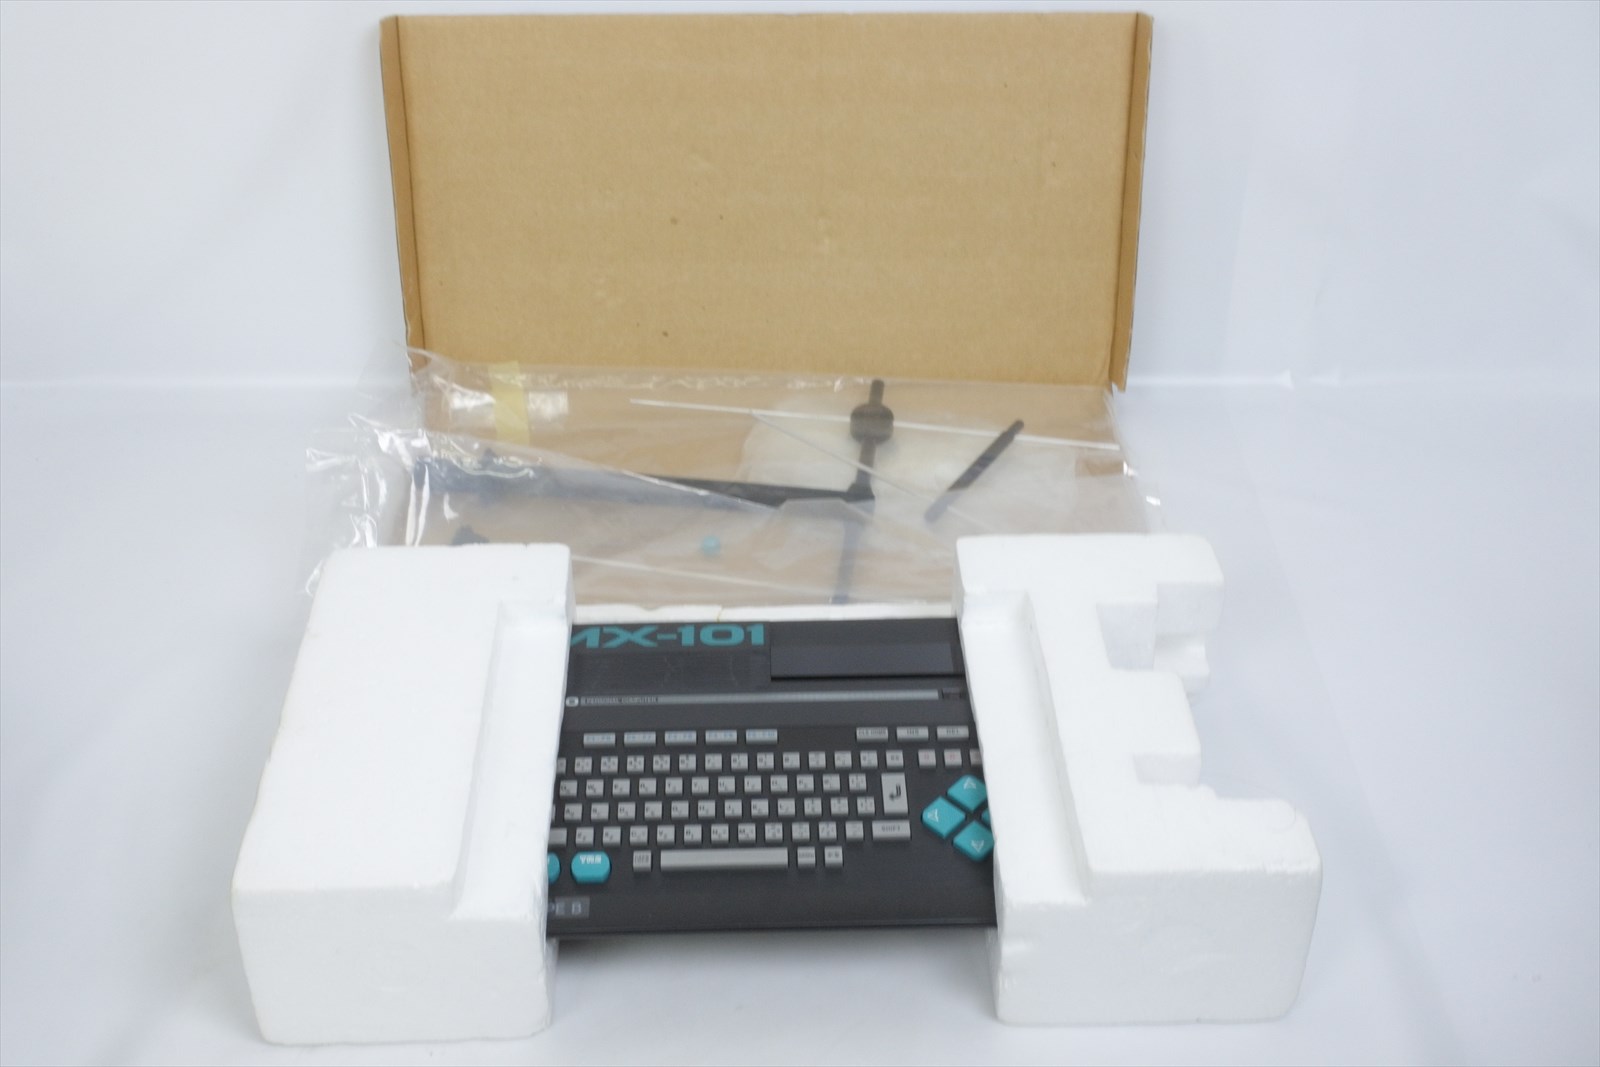 MSX MX-101 CASIO Personal Computer System Working Tested JAPAN Game